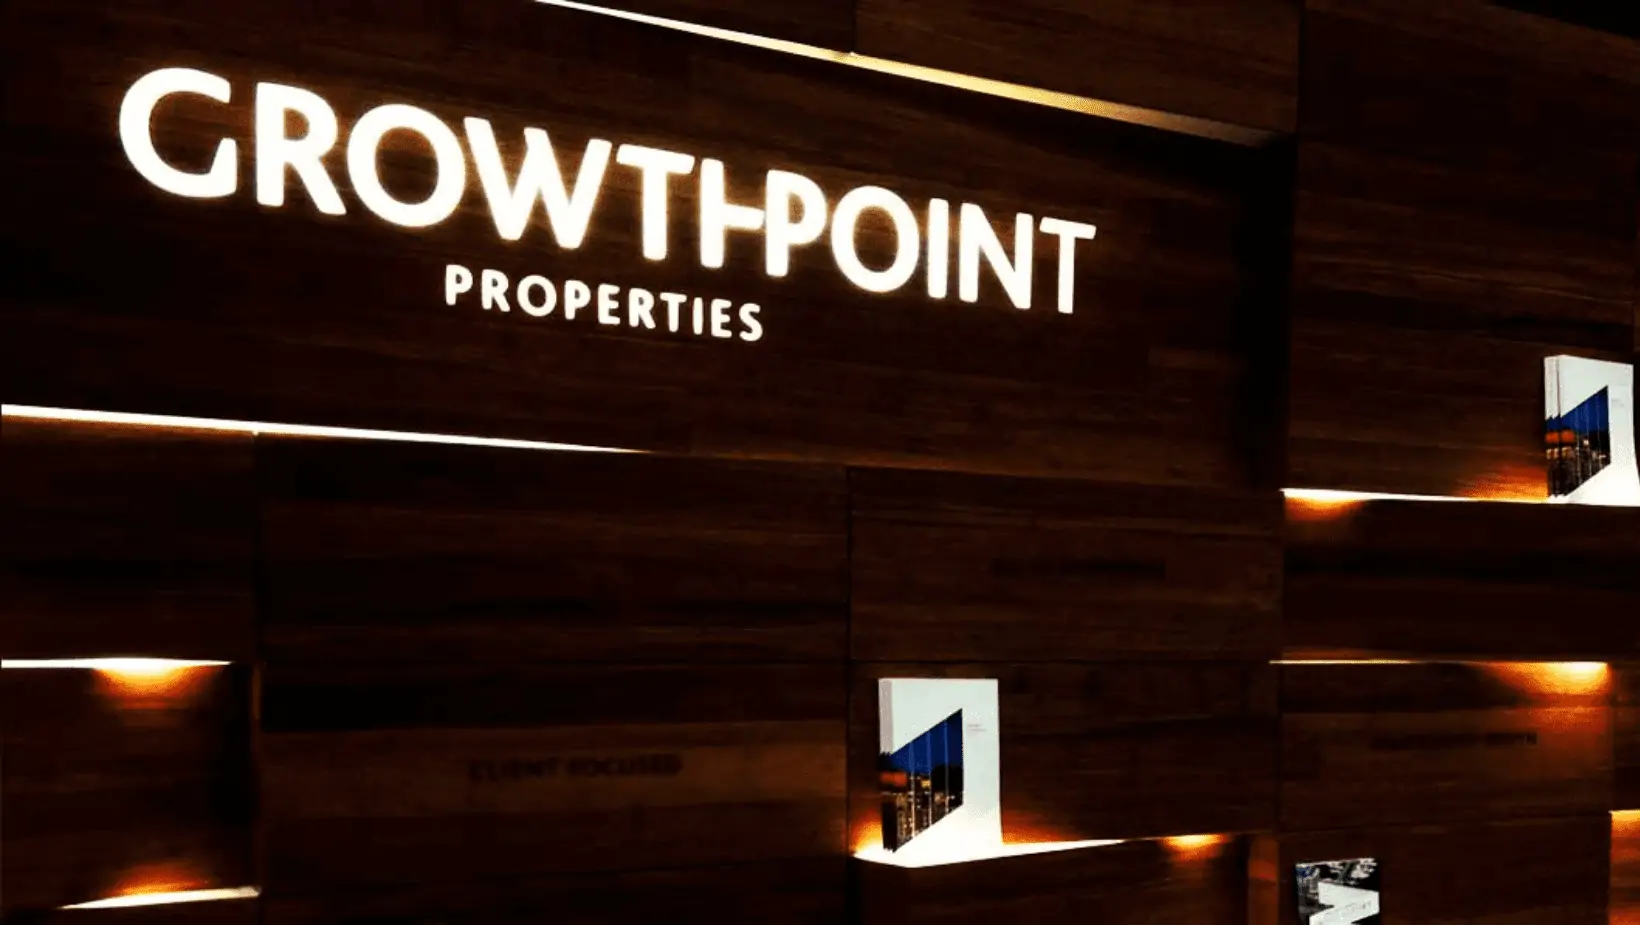 Growthpoint’s 4% Revenue Surge and Dividend Declaration